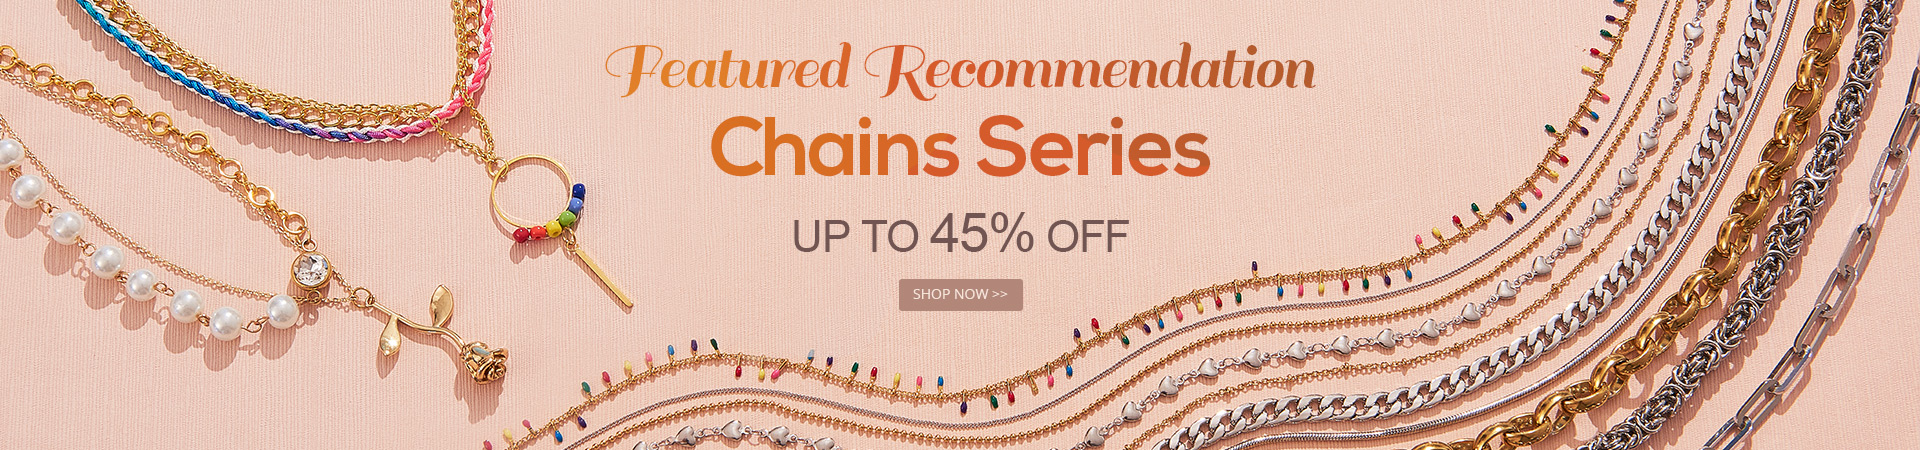 Featured Recommendation-Chains Series Up To 45% OFF